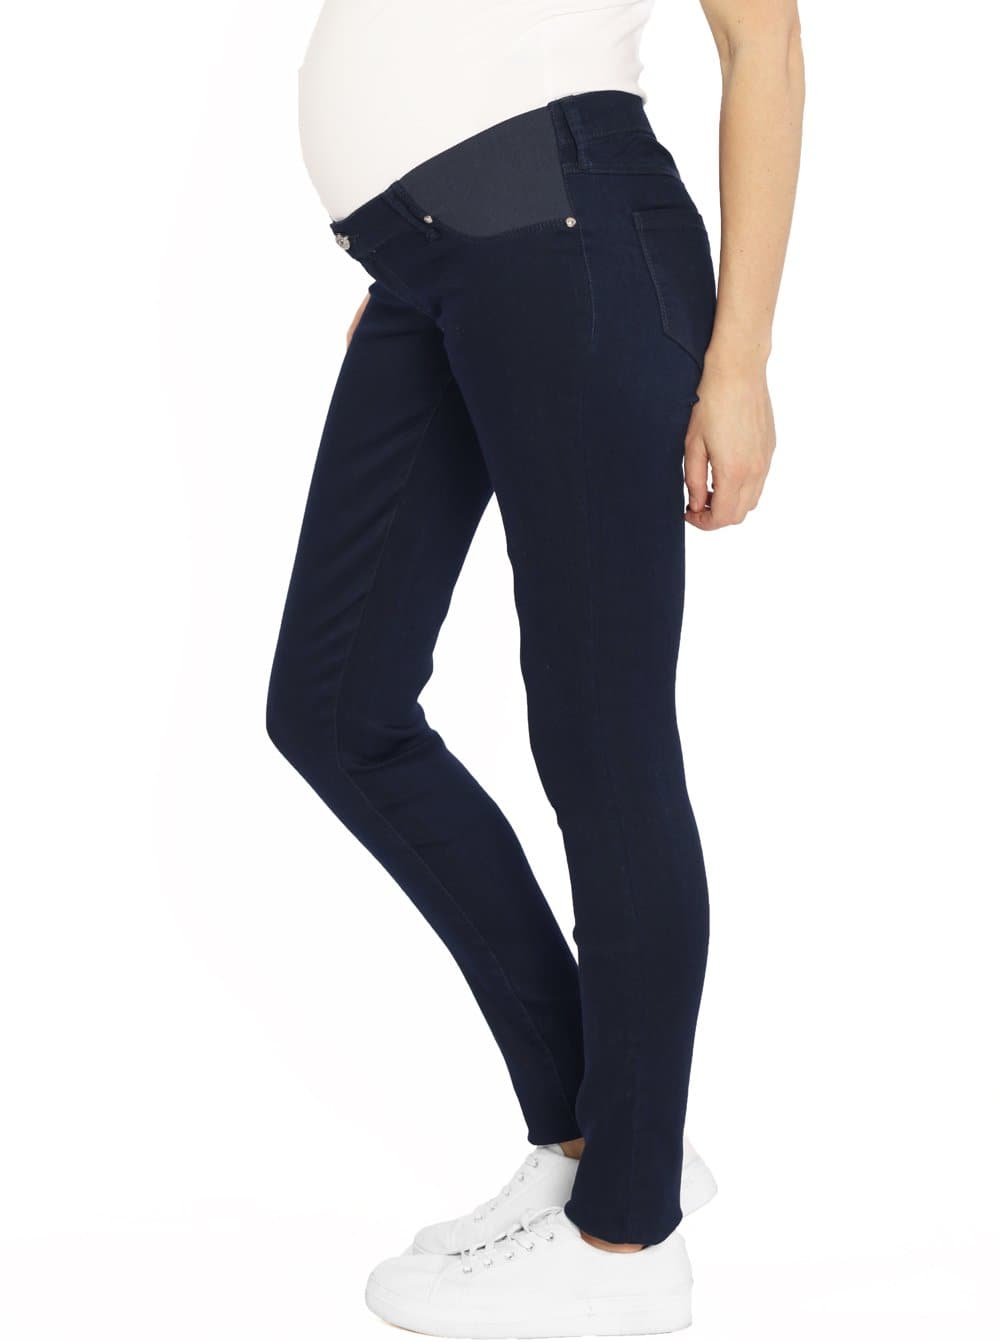 Maternity Comfortable Stretch Slim Jeans in Navy maternity jeans (1568957038695)